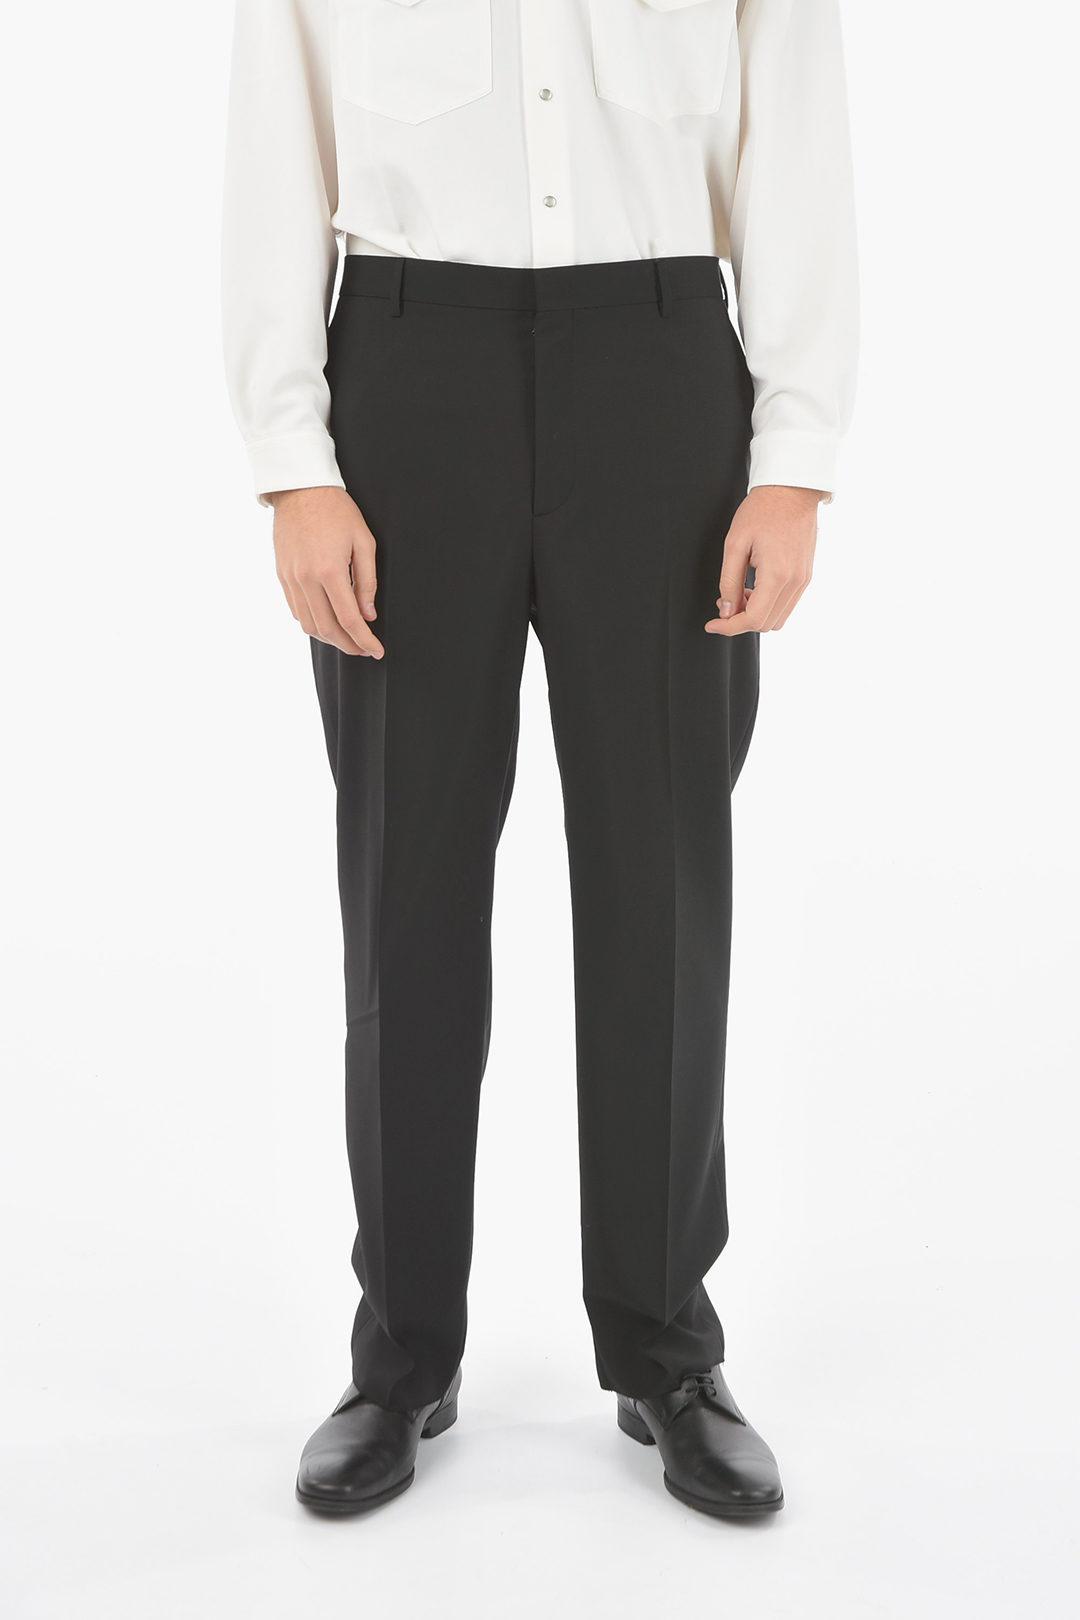 Valentino Mohair and Wool Tailoring Pants men - Glamood Outlet